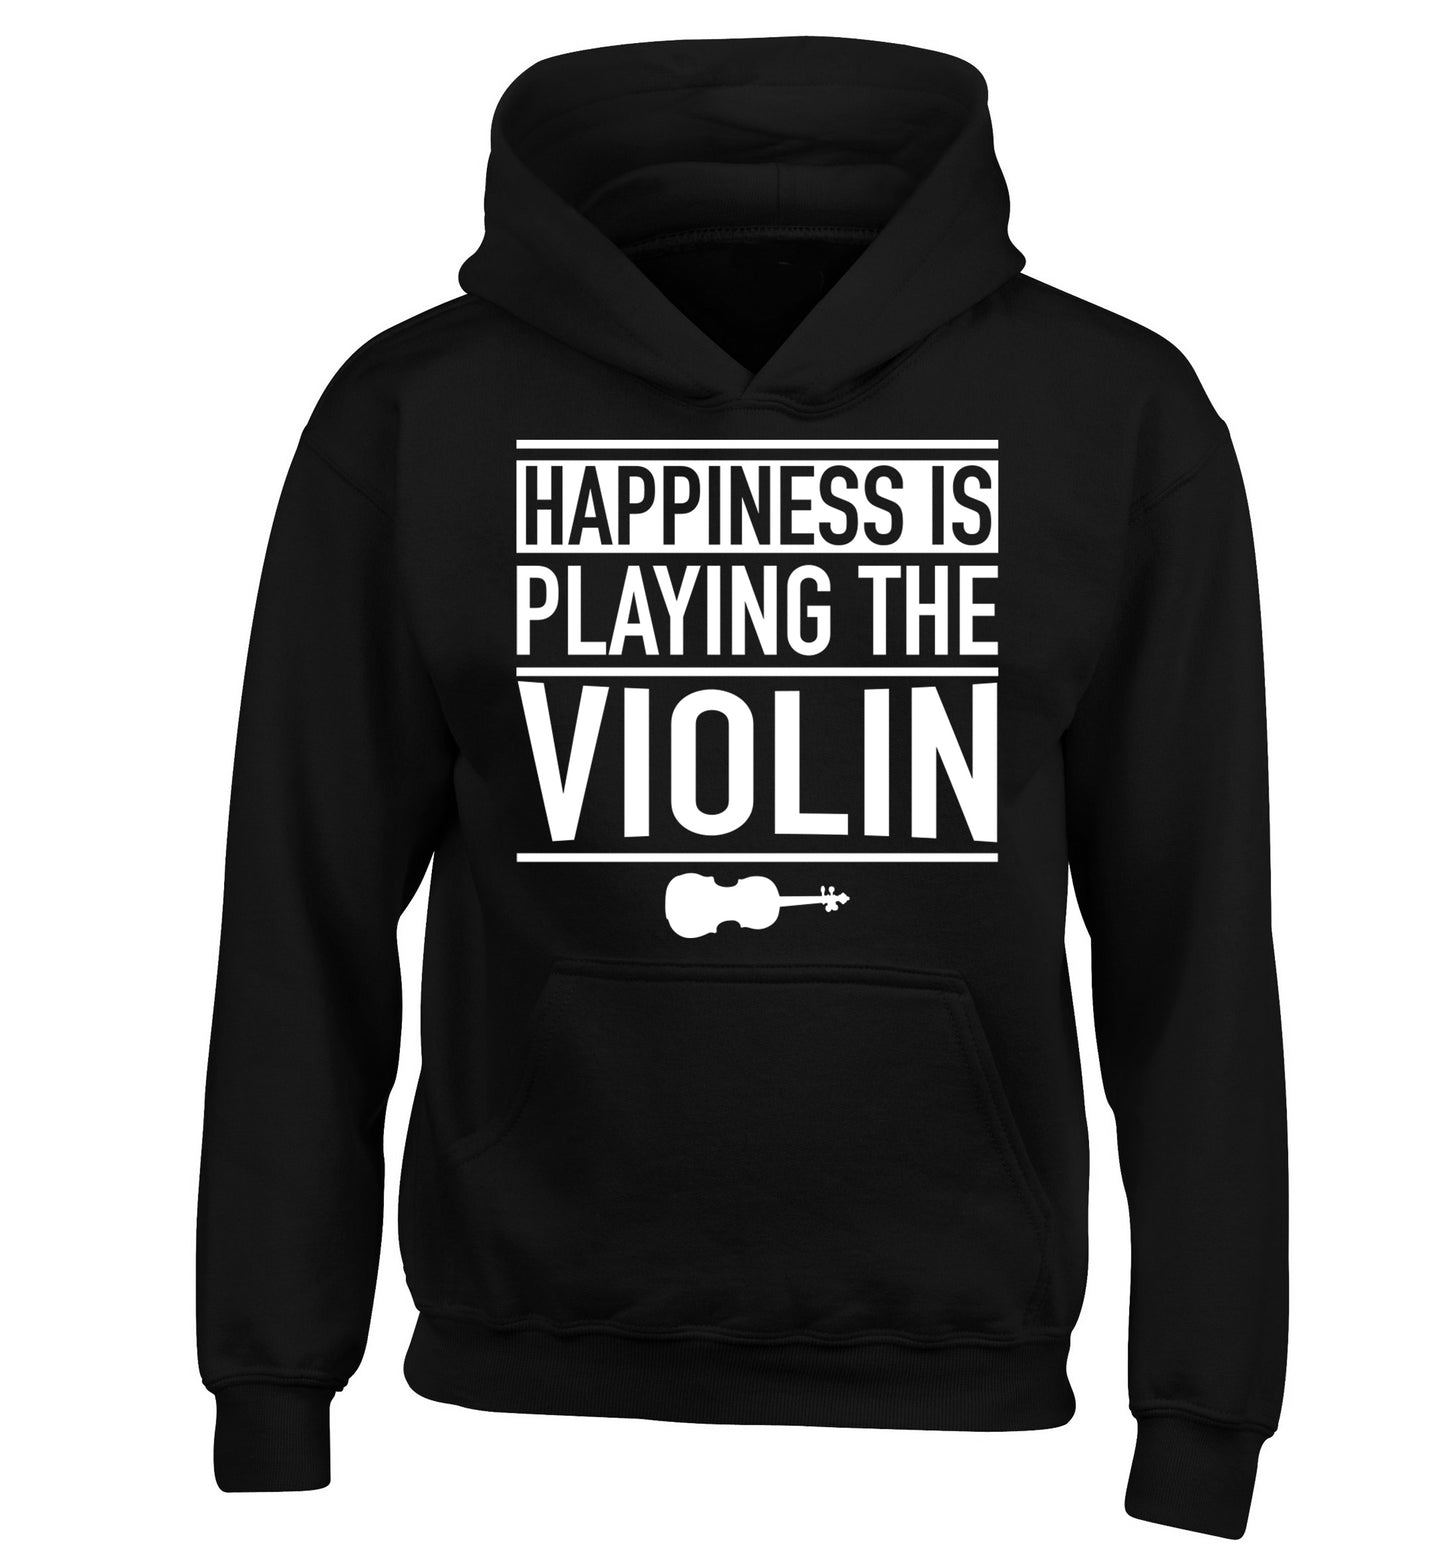 Happiness is playing the violin children's black hoodie 12-13 Years